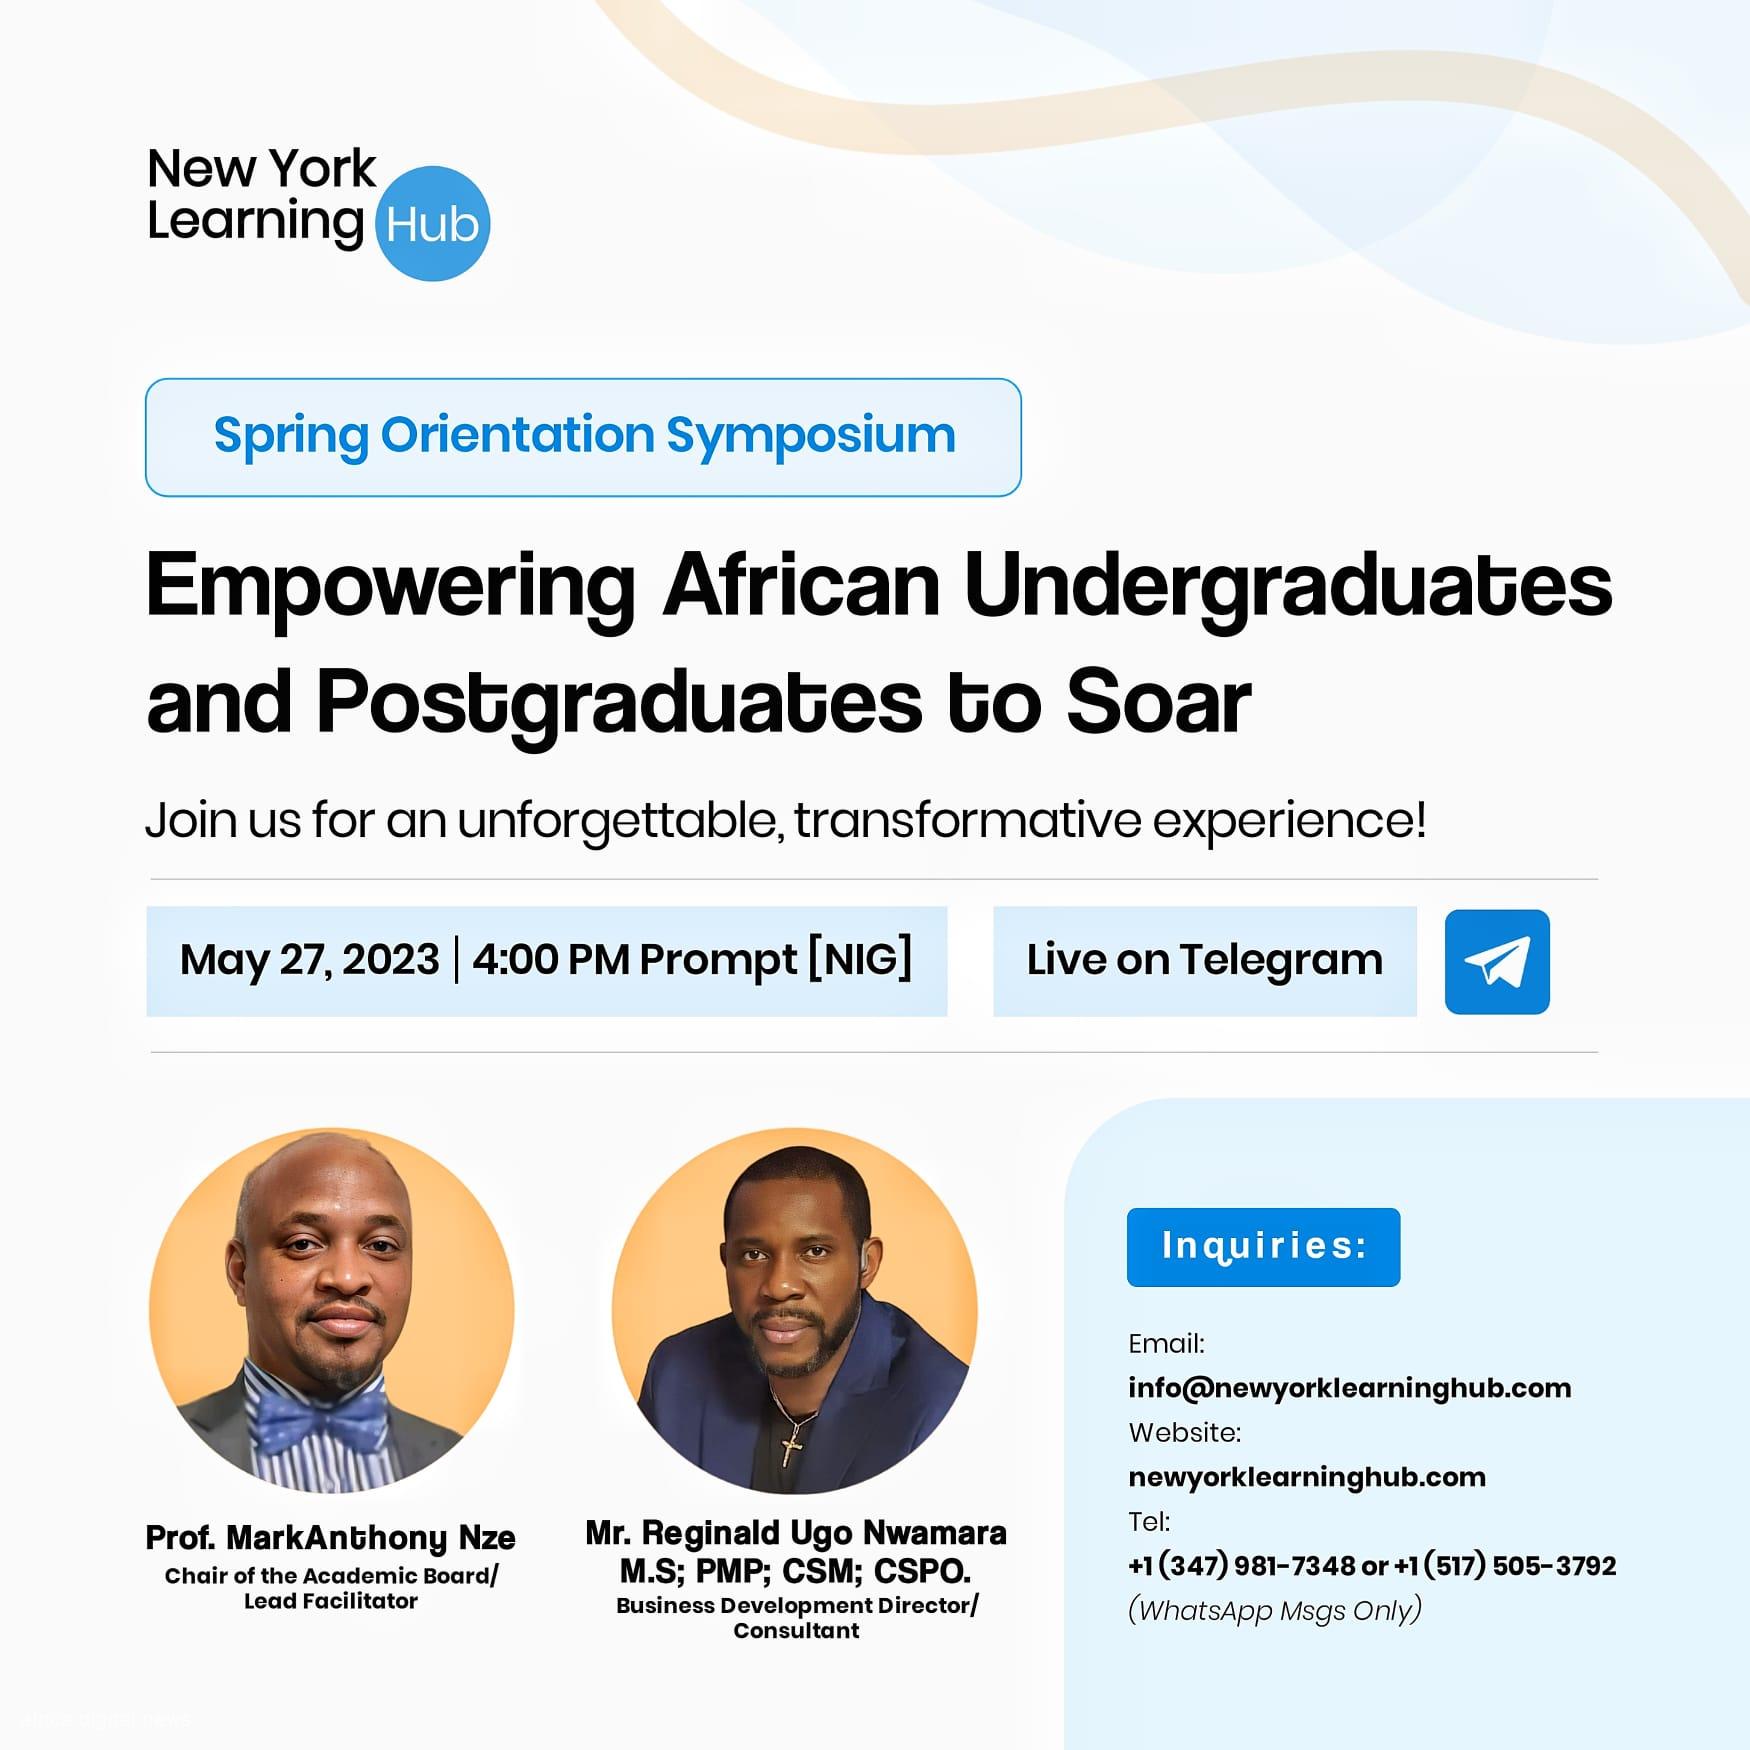 NLYH Spring Symposium Empowering African Students To Soar